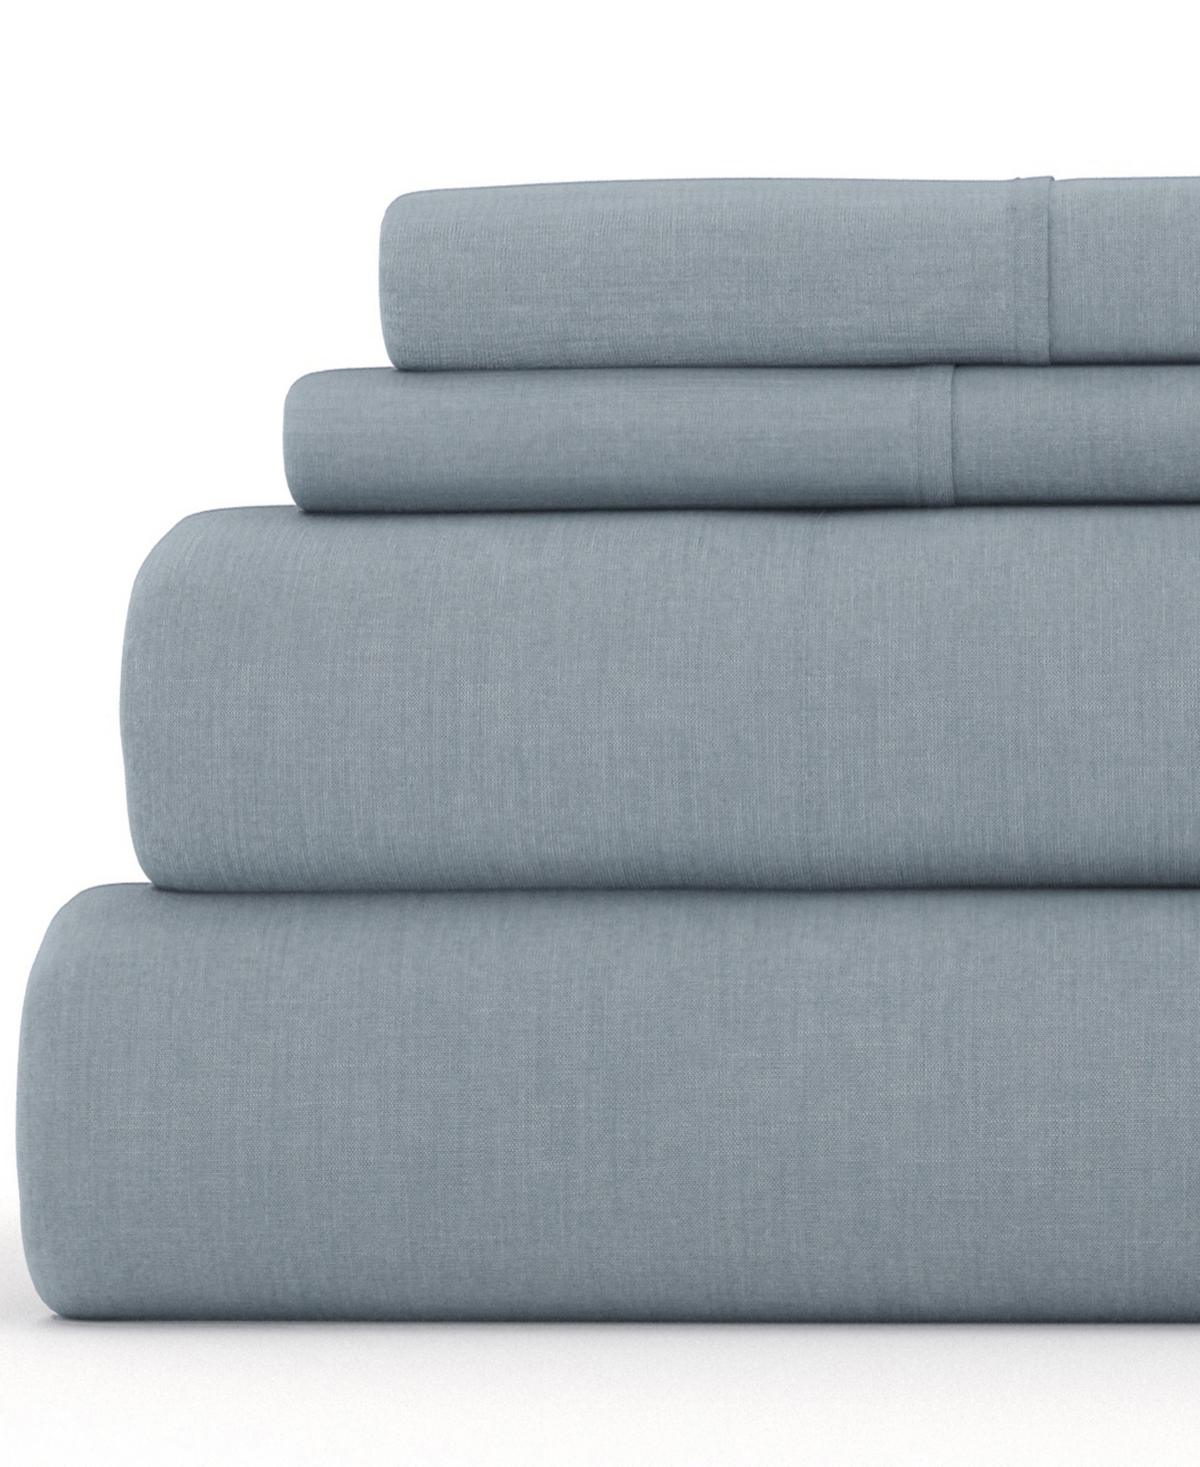 Ienjoy Home Collection Linen Rayon From Bamboo Blend Deep Pocket 300 Thread Count 3 Piece Sheet Set, In Blue